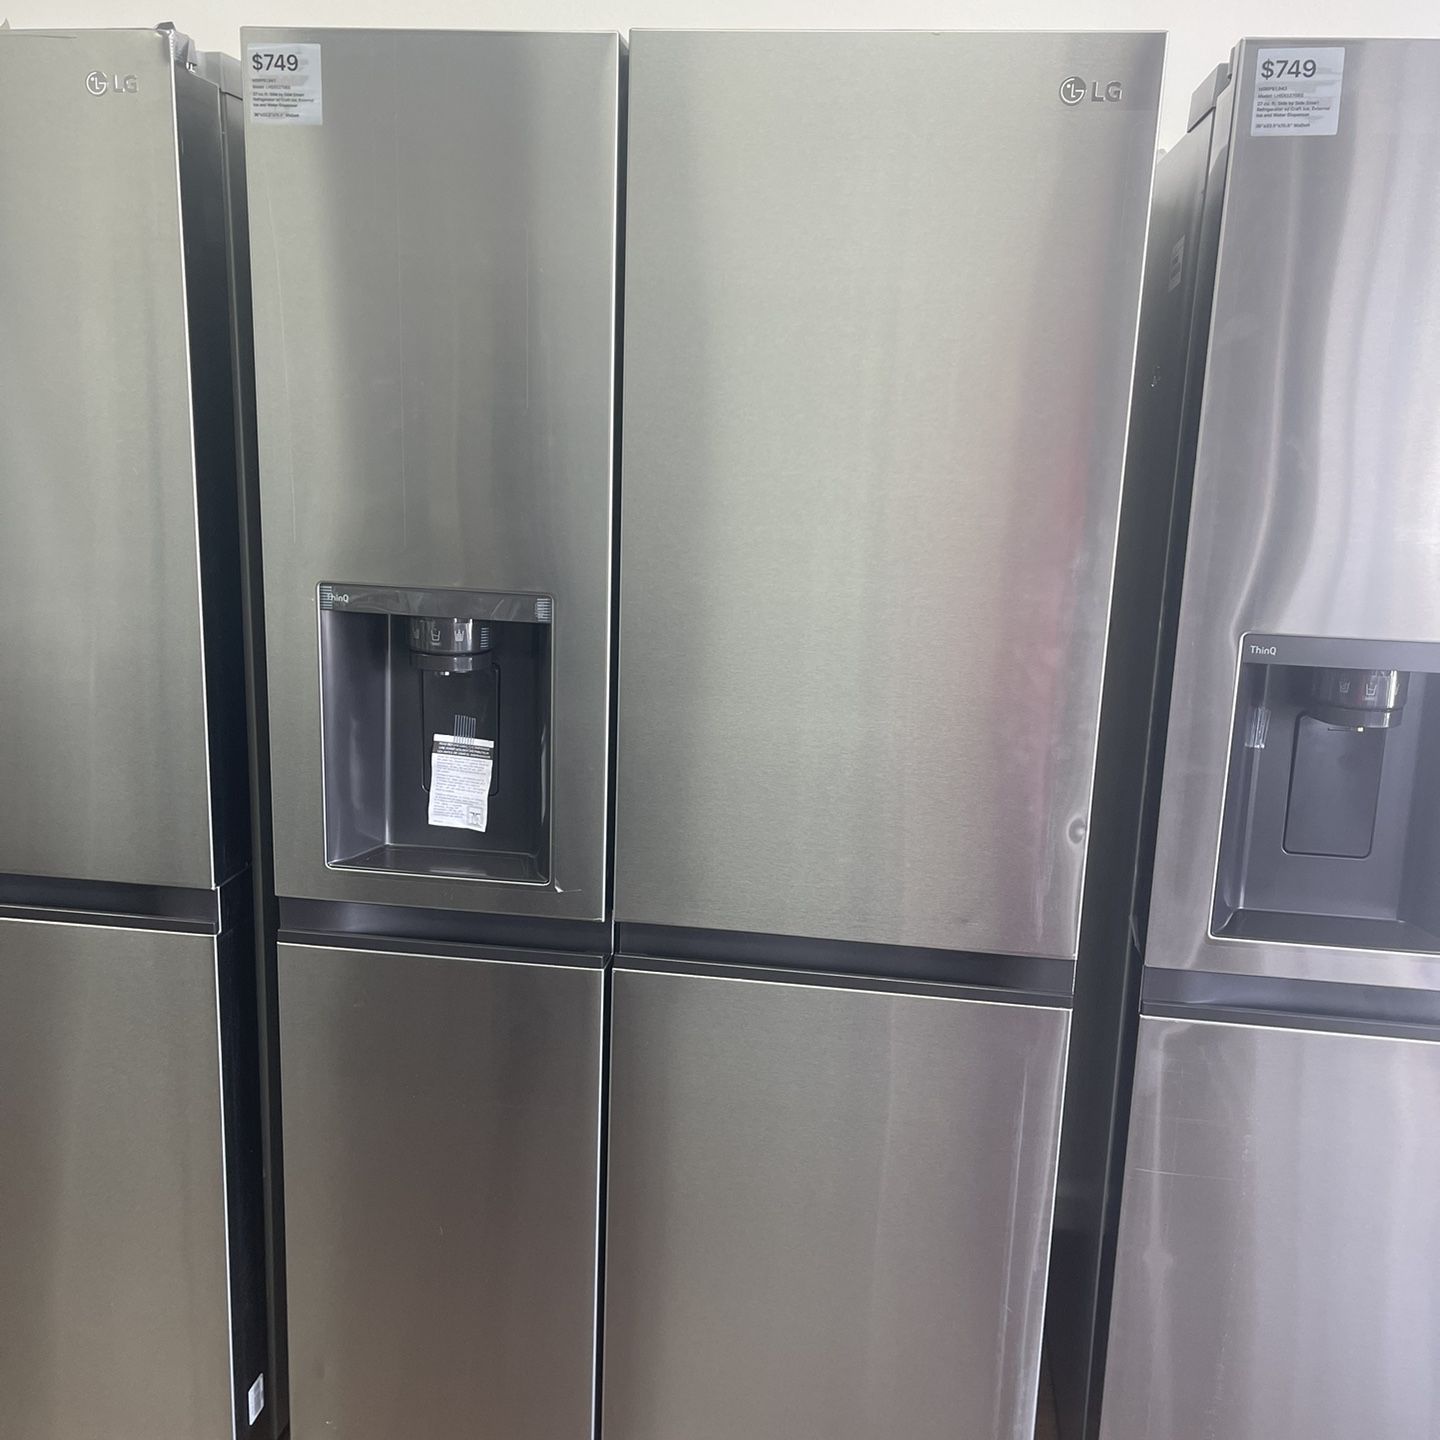 $749 LG Silver 27 cu ft Side-by-Side Refrigerator w/ Craft Ice, Classic Ice, & External H2O Dispenser w/ Filter @ 61% Off MSRP or $1194 Off!😲📉🏷️